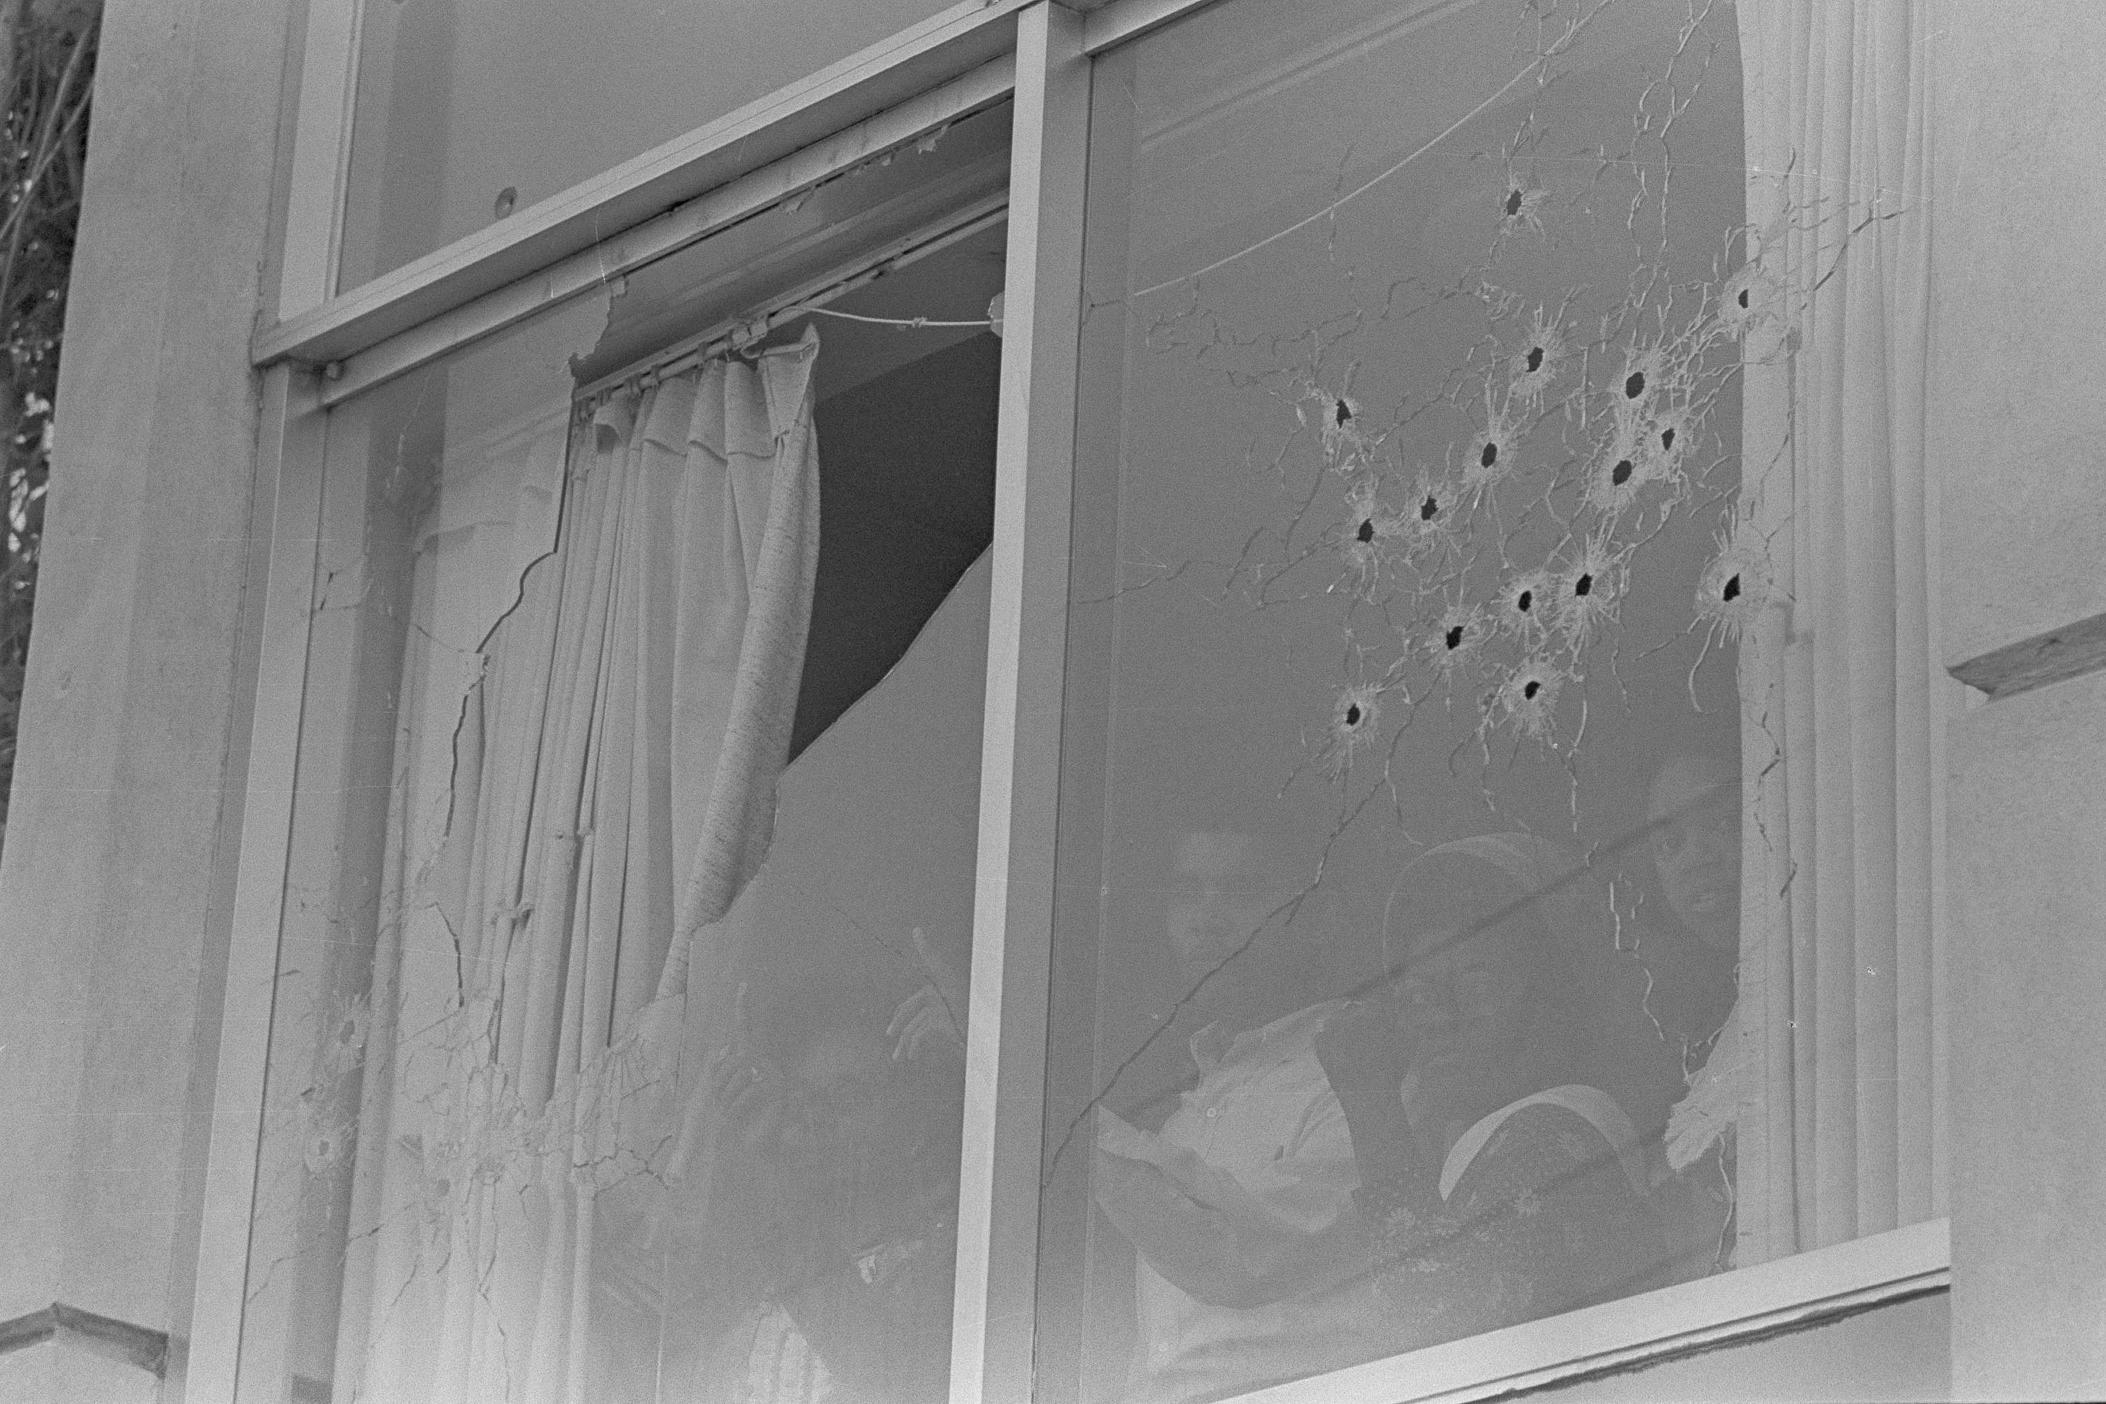 Students peer out of the bullet-riddled windows of Alexander Hall, a women's dormitory at Jackson State College in Jackson, Miss., after two African-American students were killed and 12 injured when police opened fire on the building, claiming they were fired upon by snipers, May 15, 1970. The shooting occurred after rioting broke out on the campus.